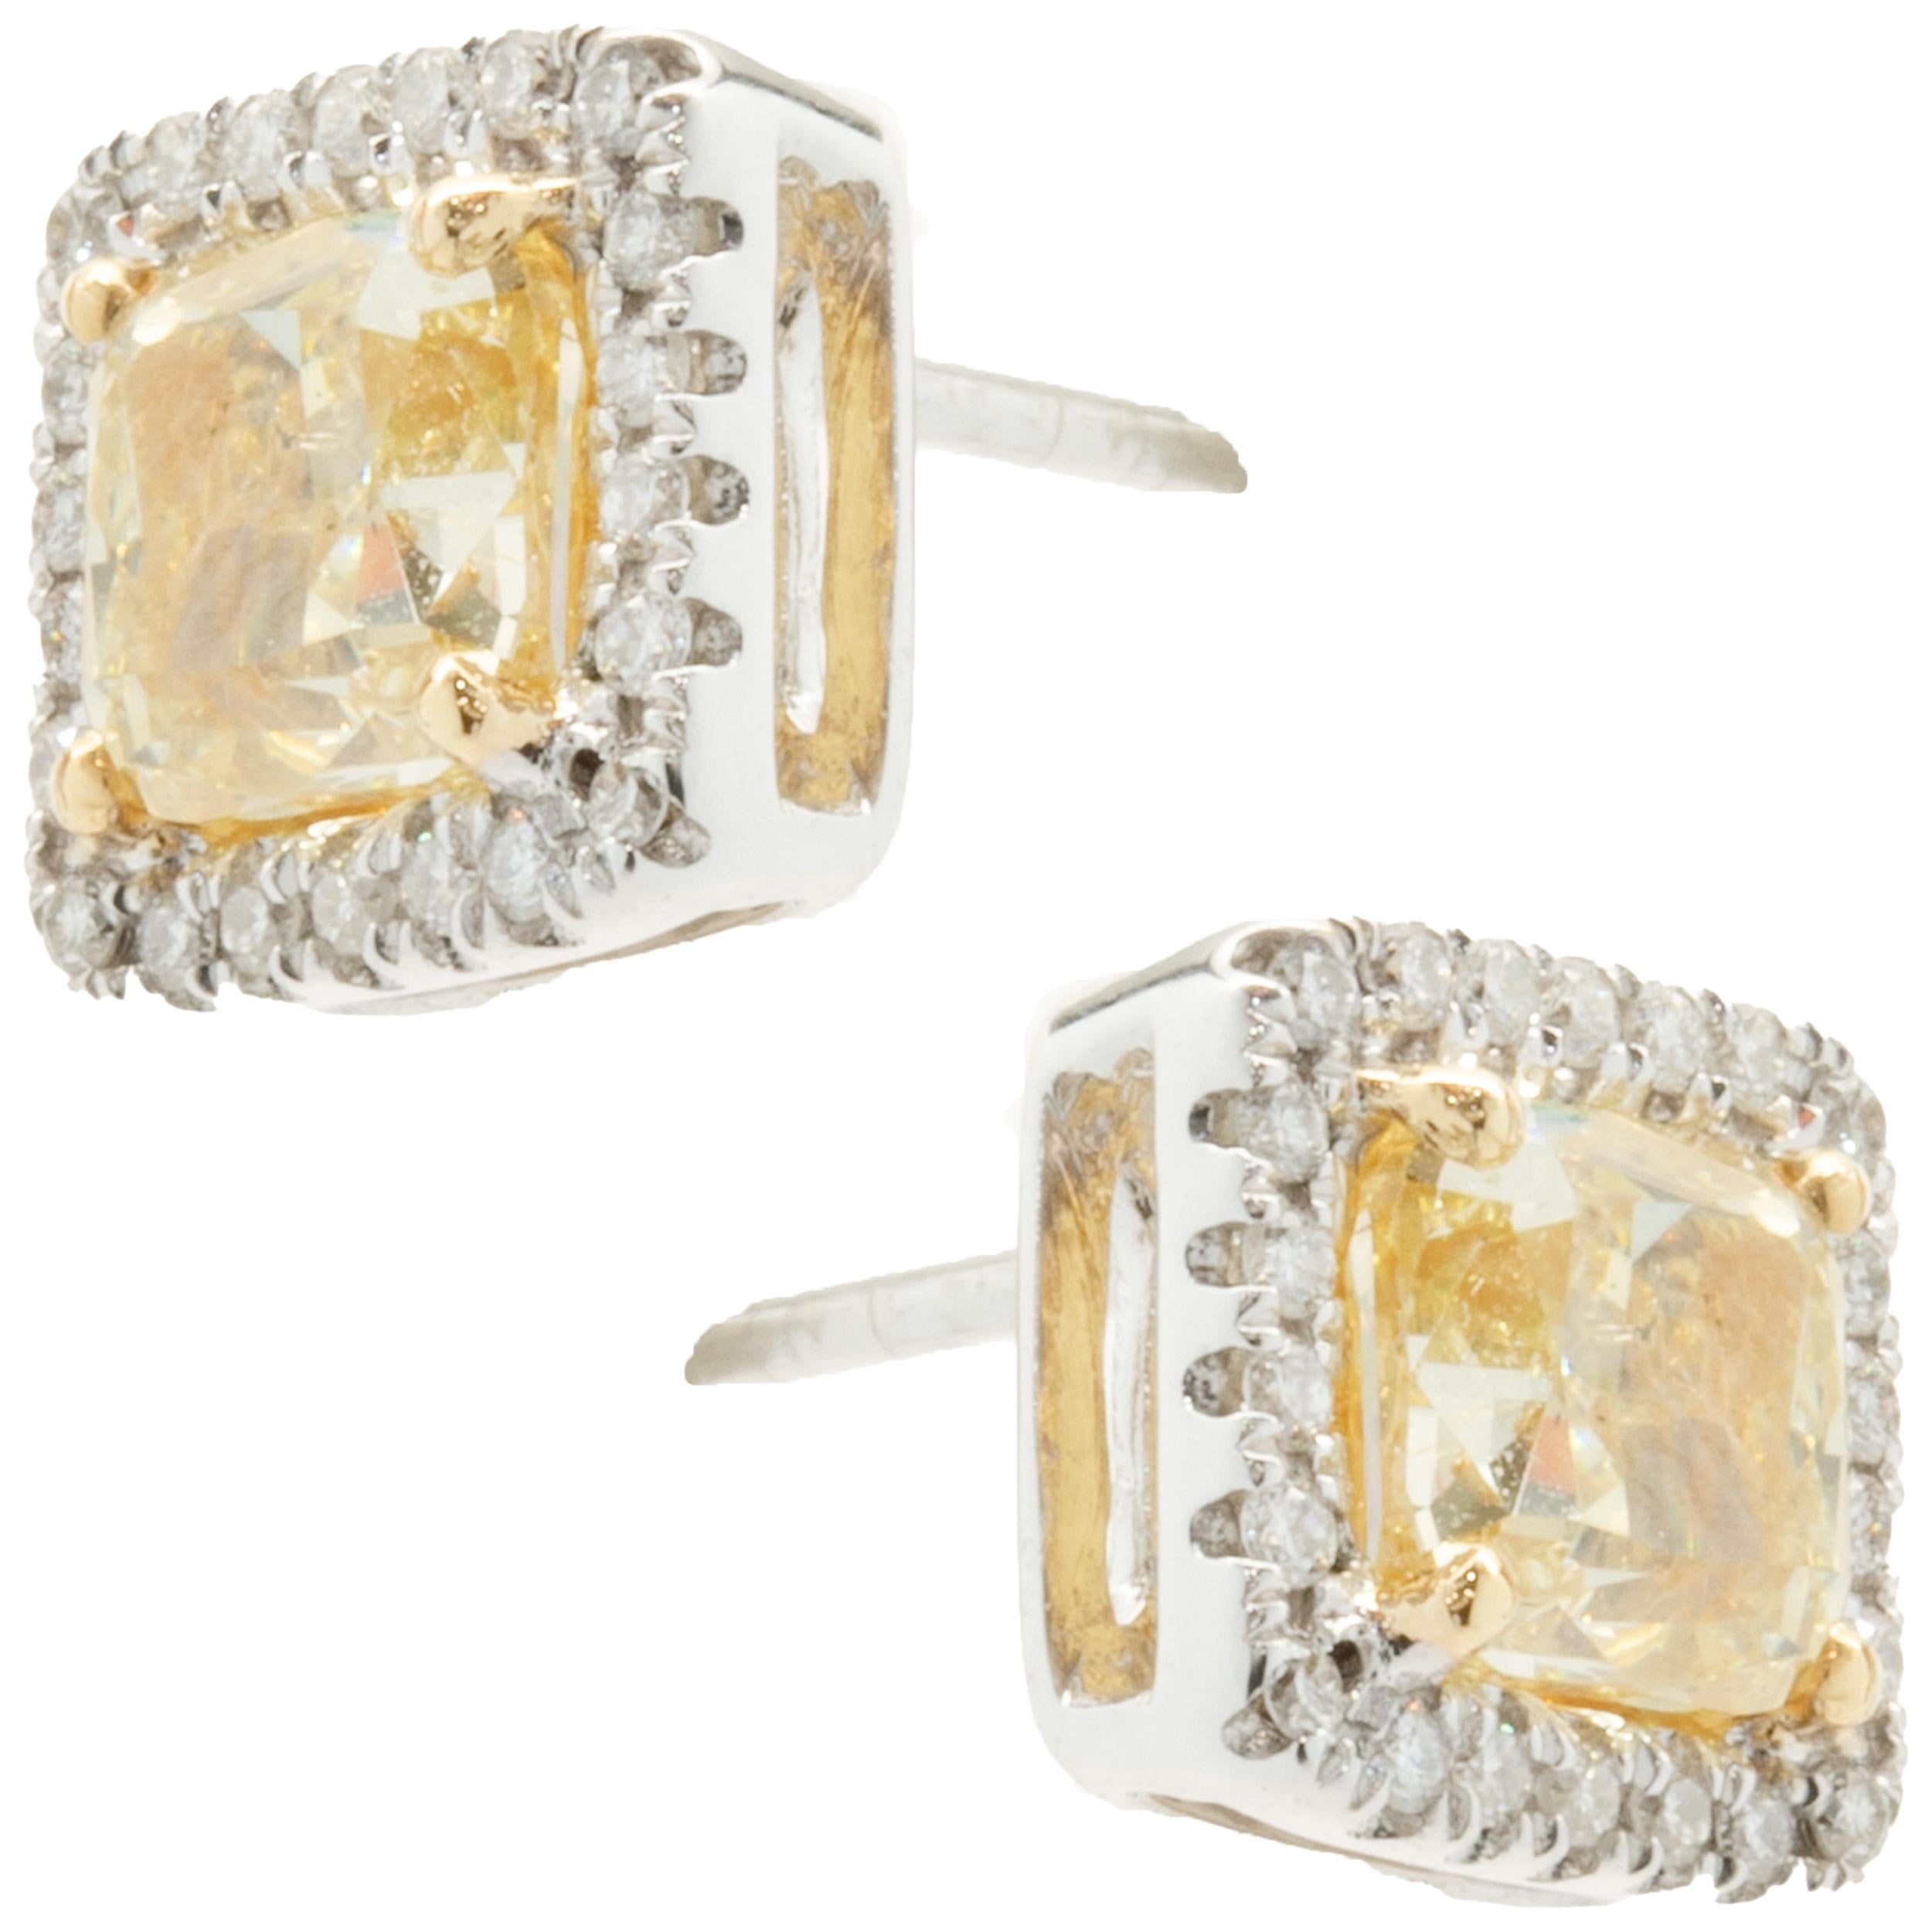 Material: 18k white & yellow gold
Diamonds: 2 cushion cut = 1.74cttw
Color: Fancy Yellow
Clarity: SI1
Diamonds: 44 round brilliant cut = 0.18cttw
Color: G
Clarity: VS2
Dimensions: earrings measure approximately 8.3mm in diameter
Fastenings: